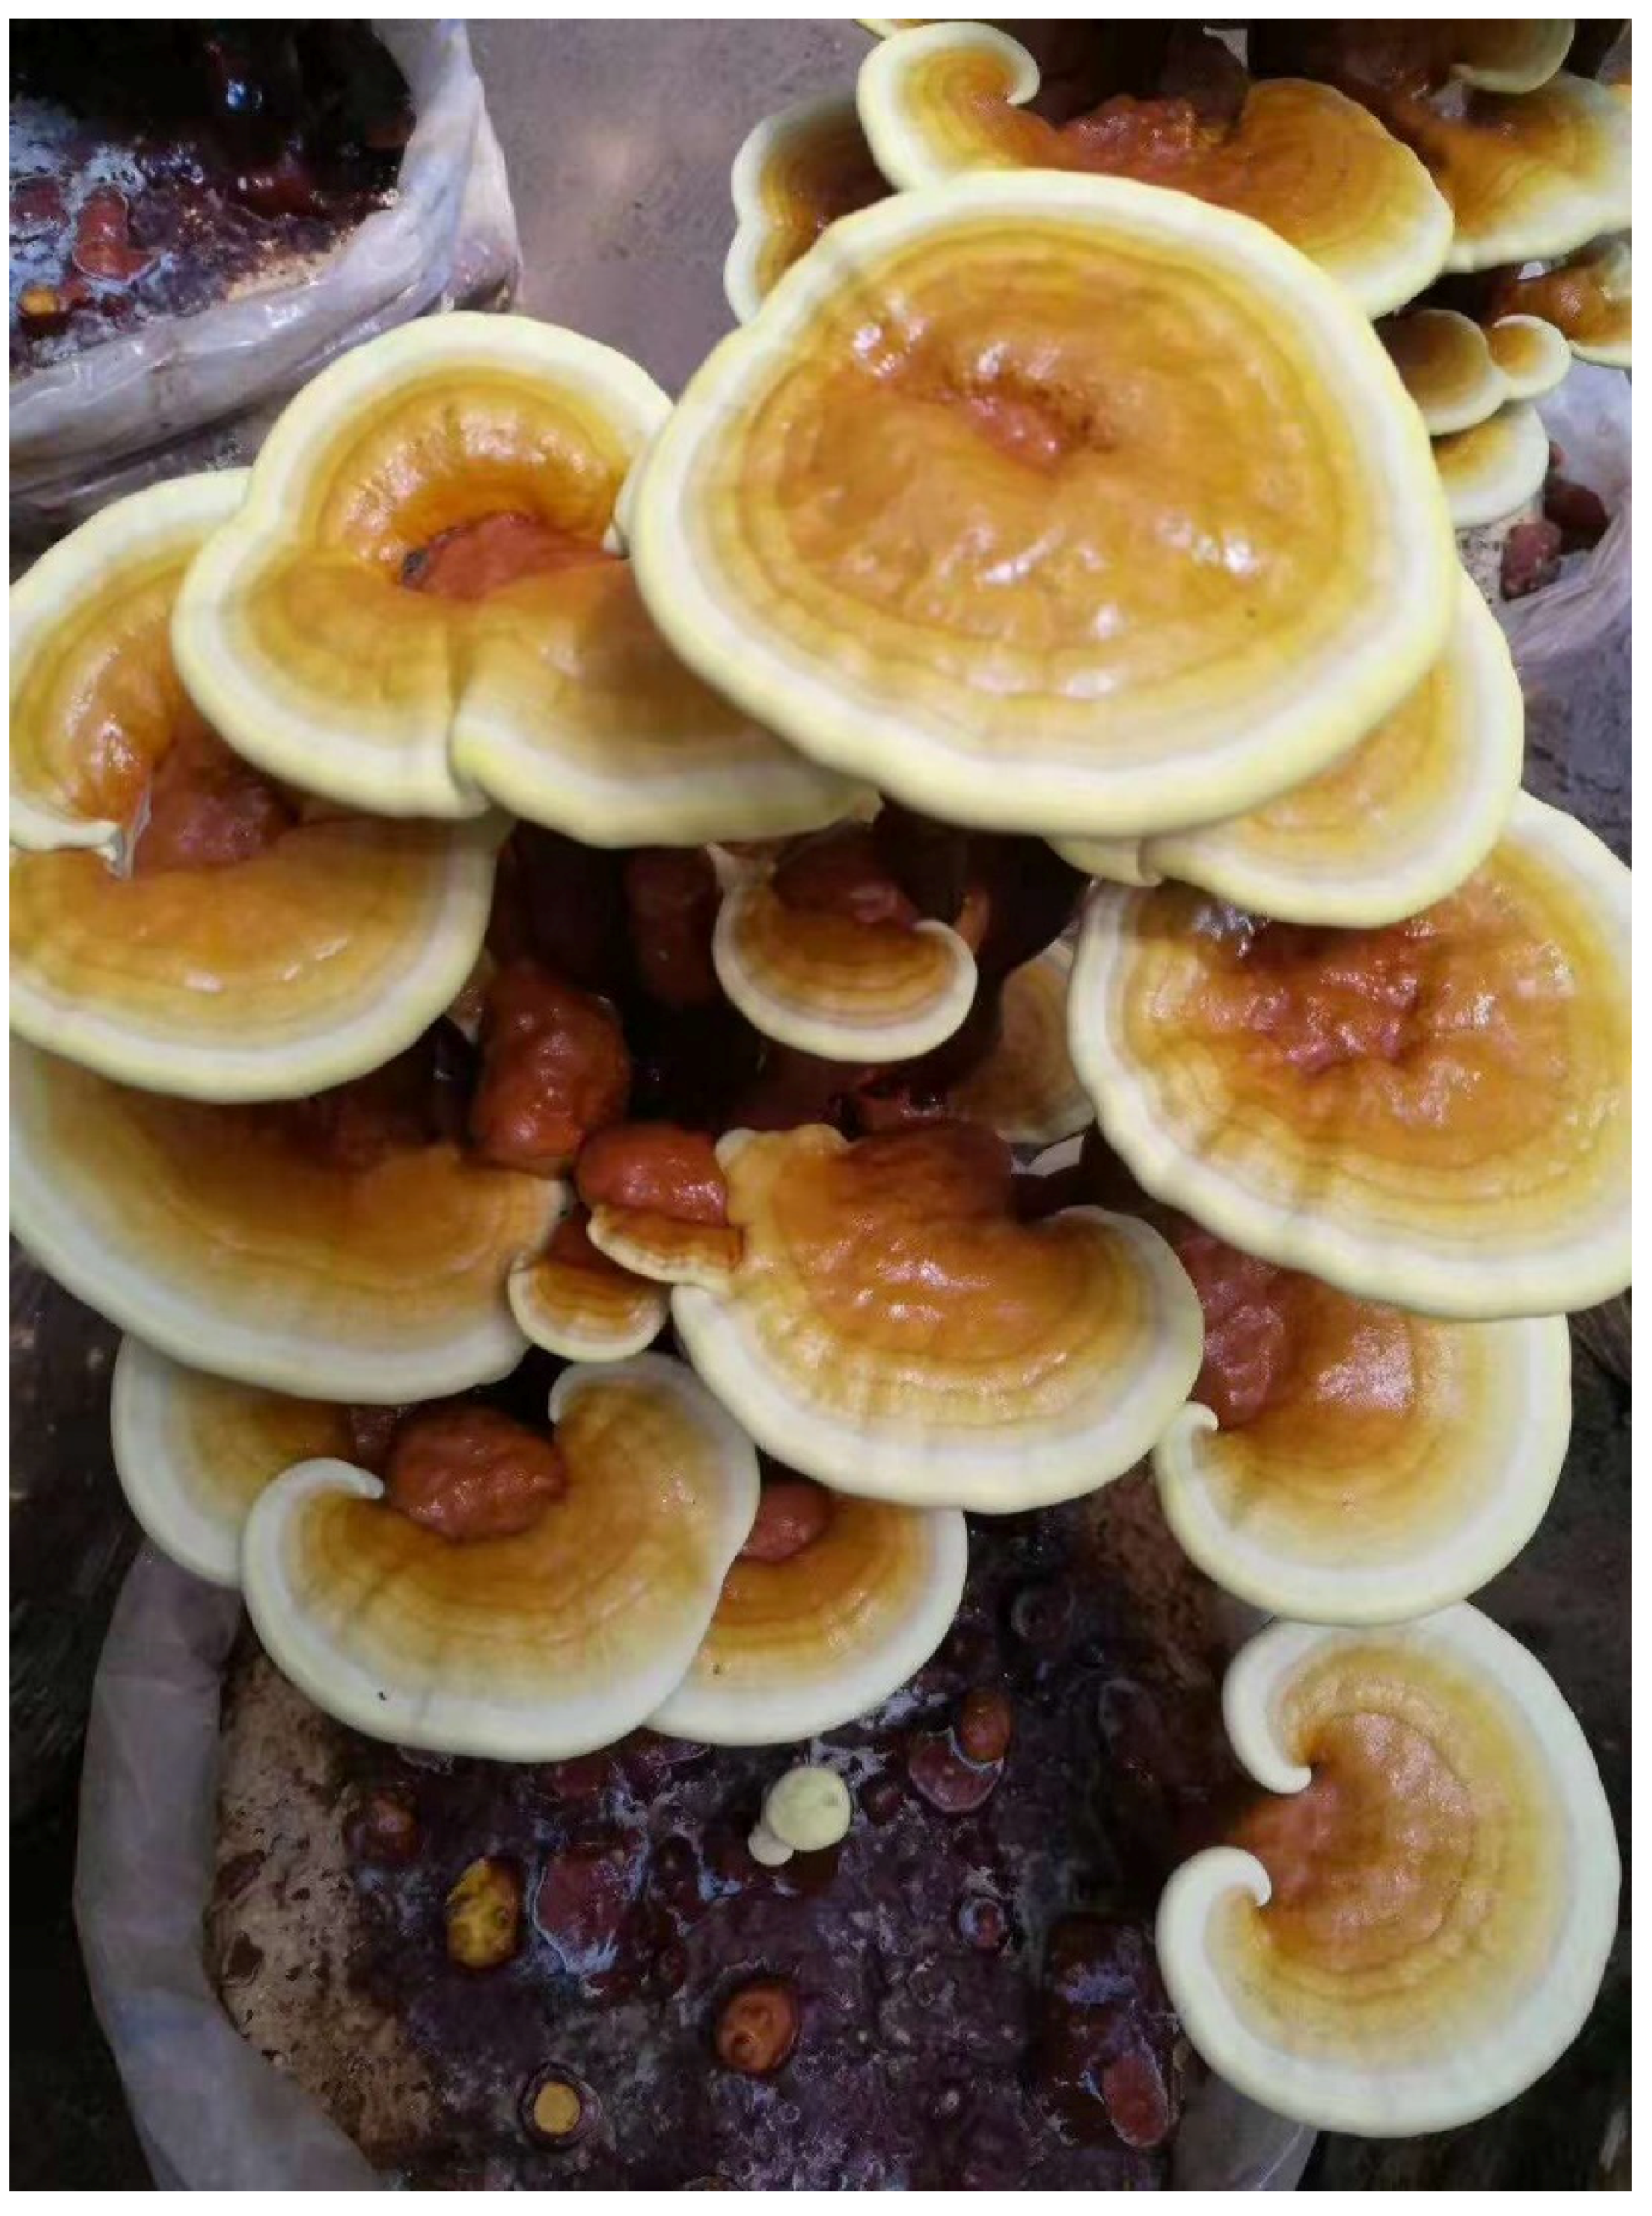 Foods | Free Full-Text | Nutritional Profile and Health Benefits of Ganoderma  lucidum &ldquo;Lingzhi, Reishi, or Mannentake&rdquo; as Functional Foods:  Current Scenario and Future Perspectives